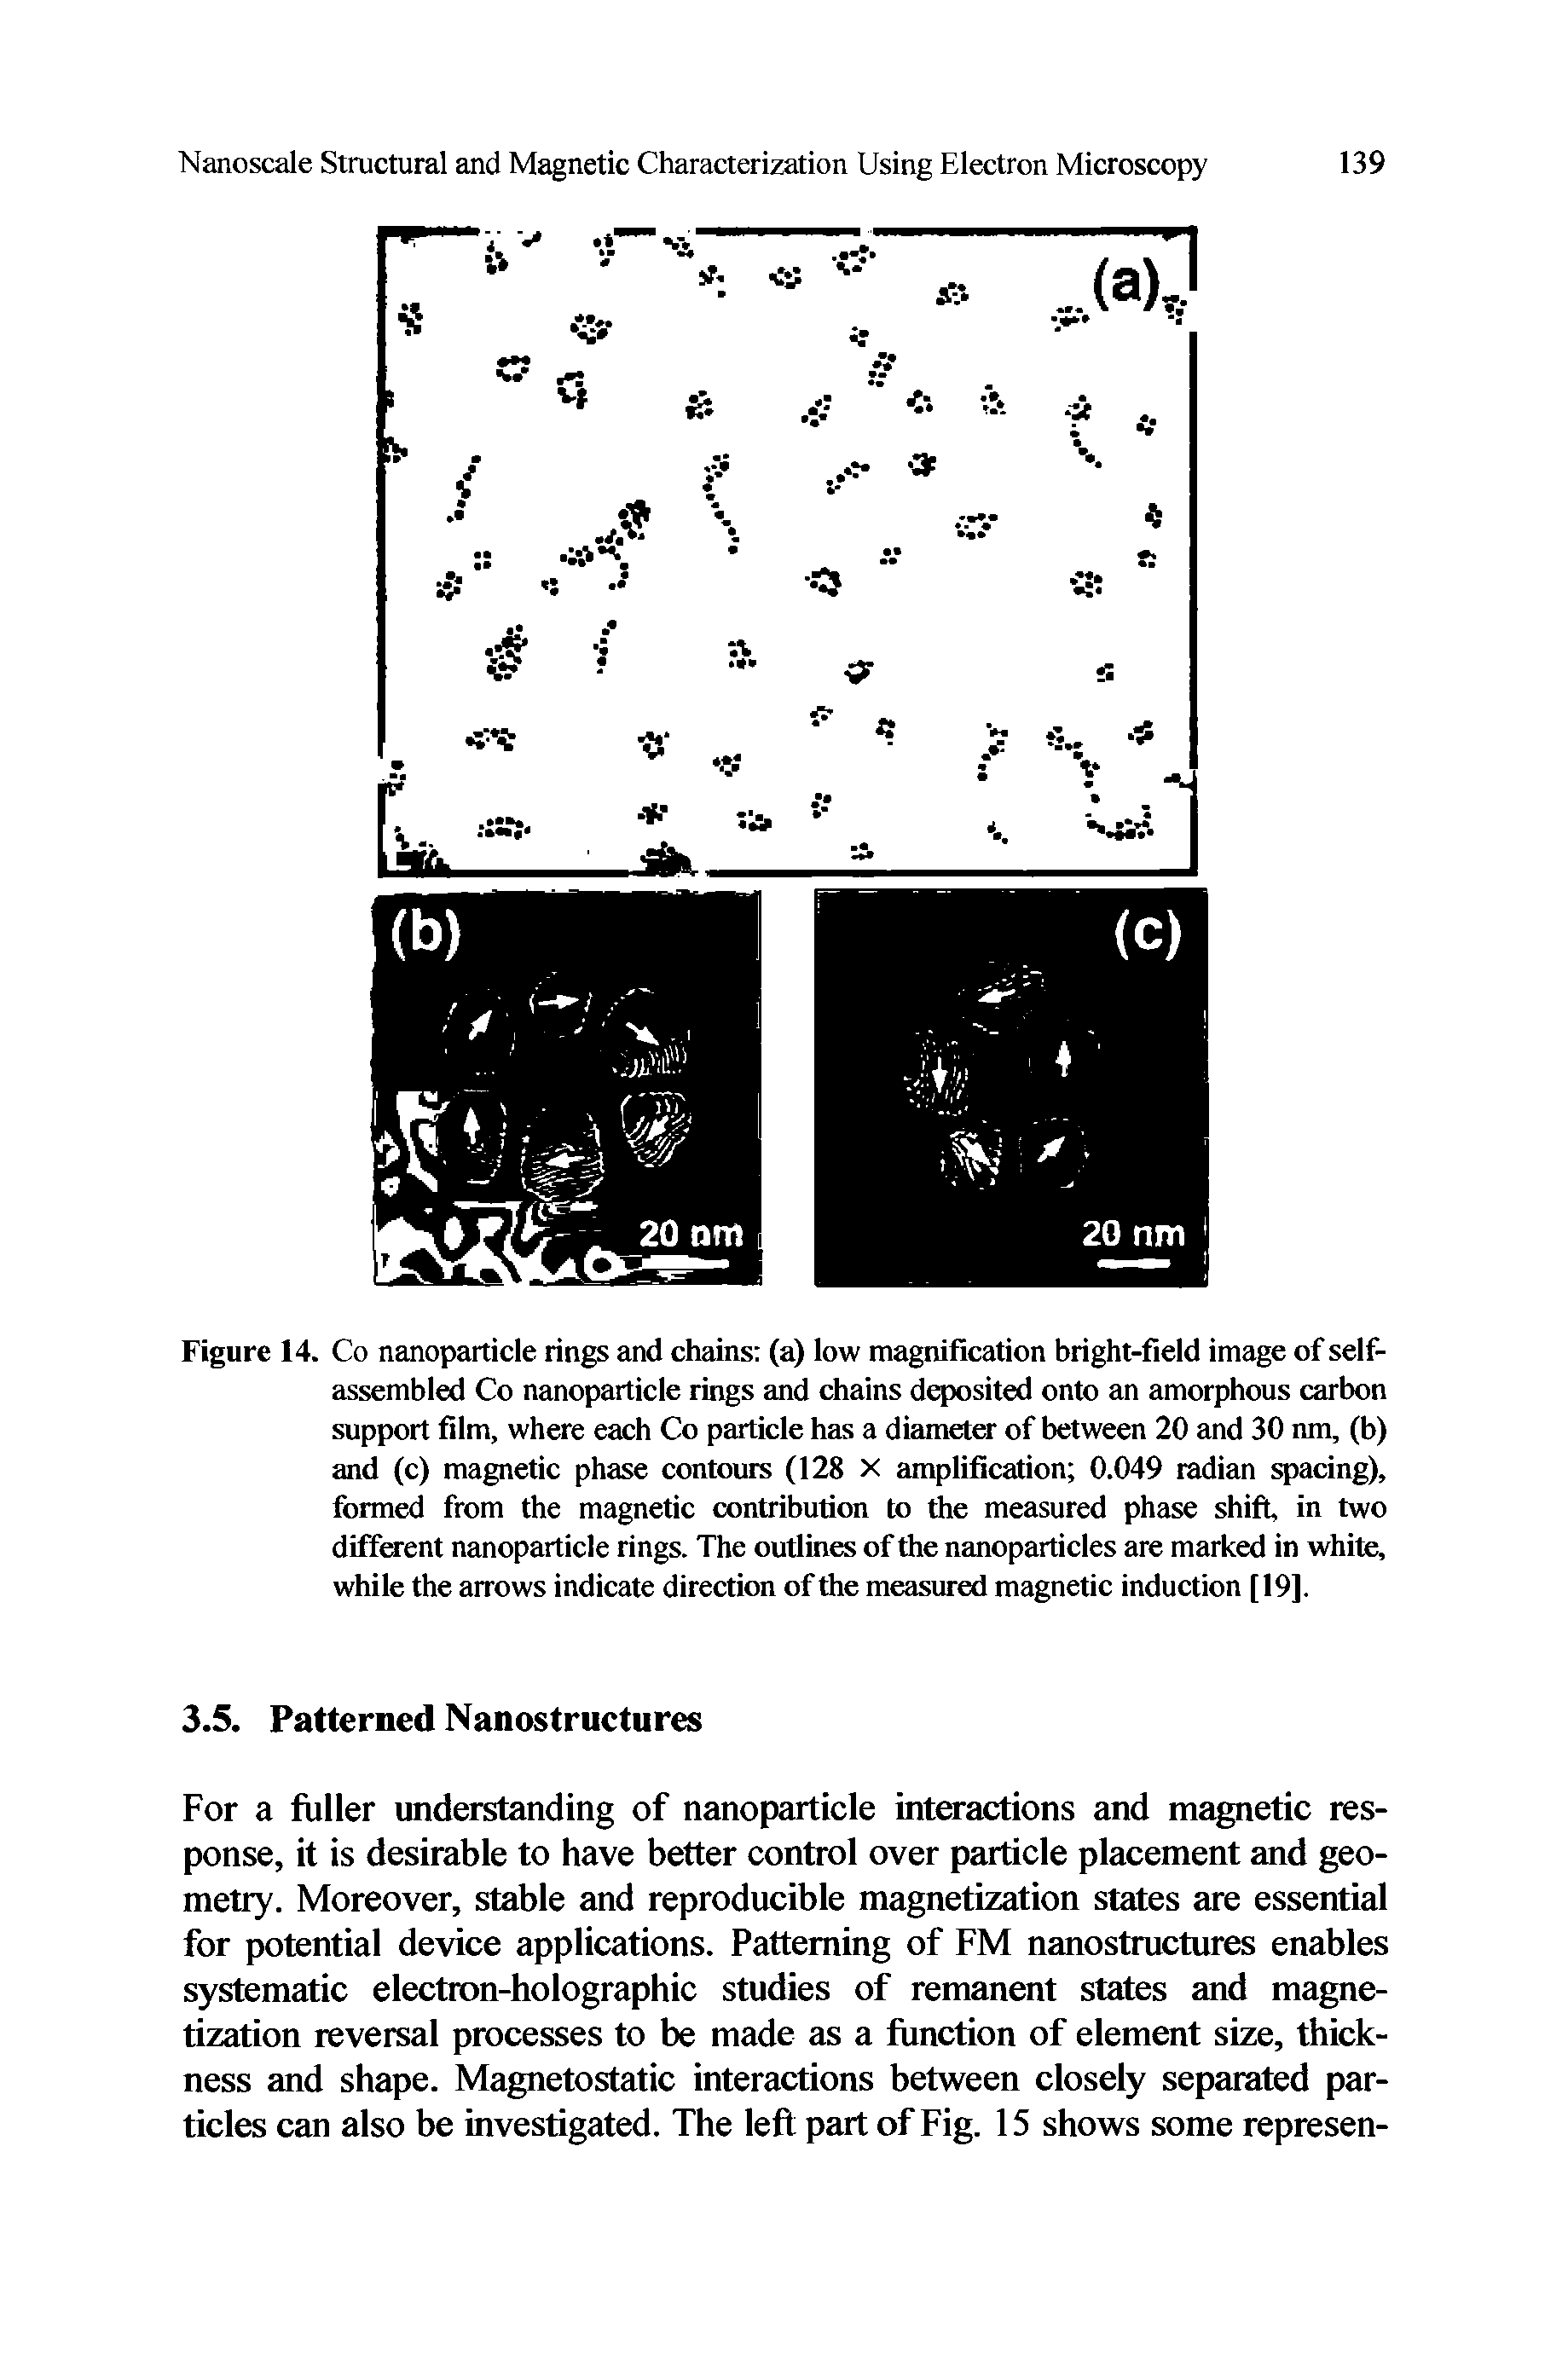 Figure 14. Co nanoparticle rings and chains (a) low magnification bright-field image of self-assembled Co nanoparticle rings and chains deposited onto an amorphous carbon support film, where each Co particle has a diameter of between 20 and 30 ran, (b) and (c) magnetic phase contours (128 X amplification 0.049 radian spacing), formed from the magnetic contribution to the measured phase shift, in two different nanoparticle rings. The outlines of the nanoparticles are marked in white, while the arrows indicate direction of the measured magnetic induction [19].